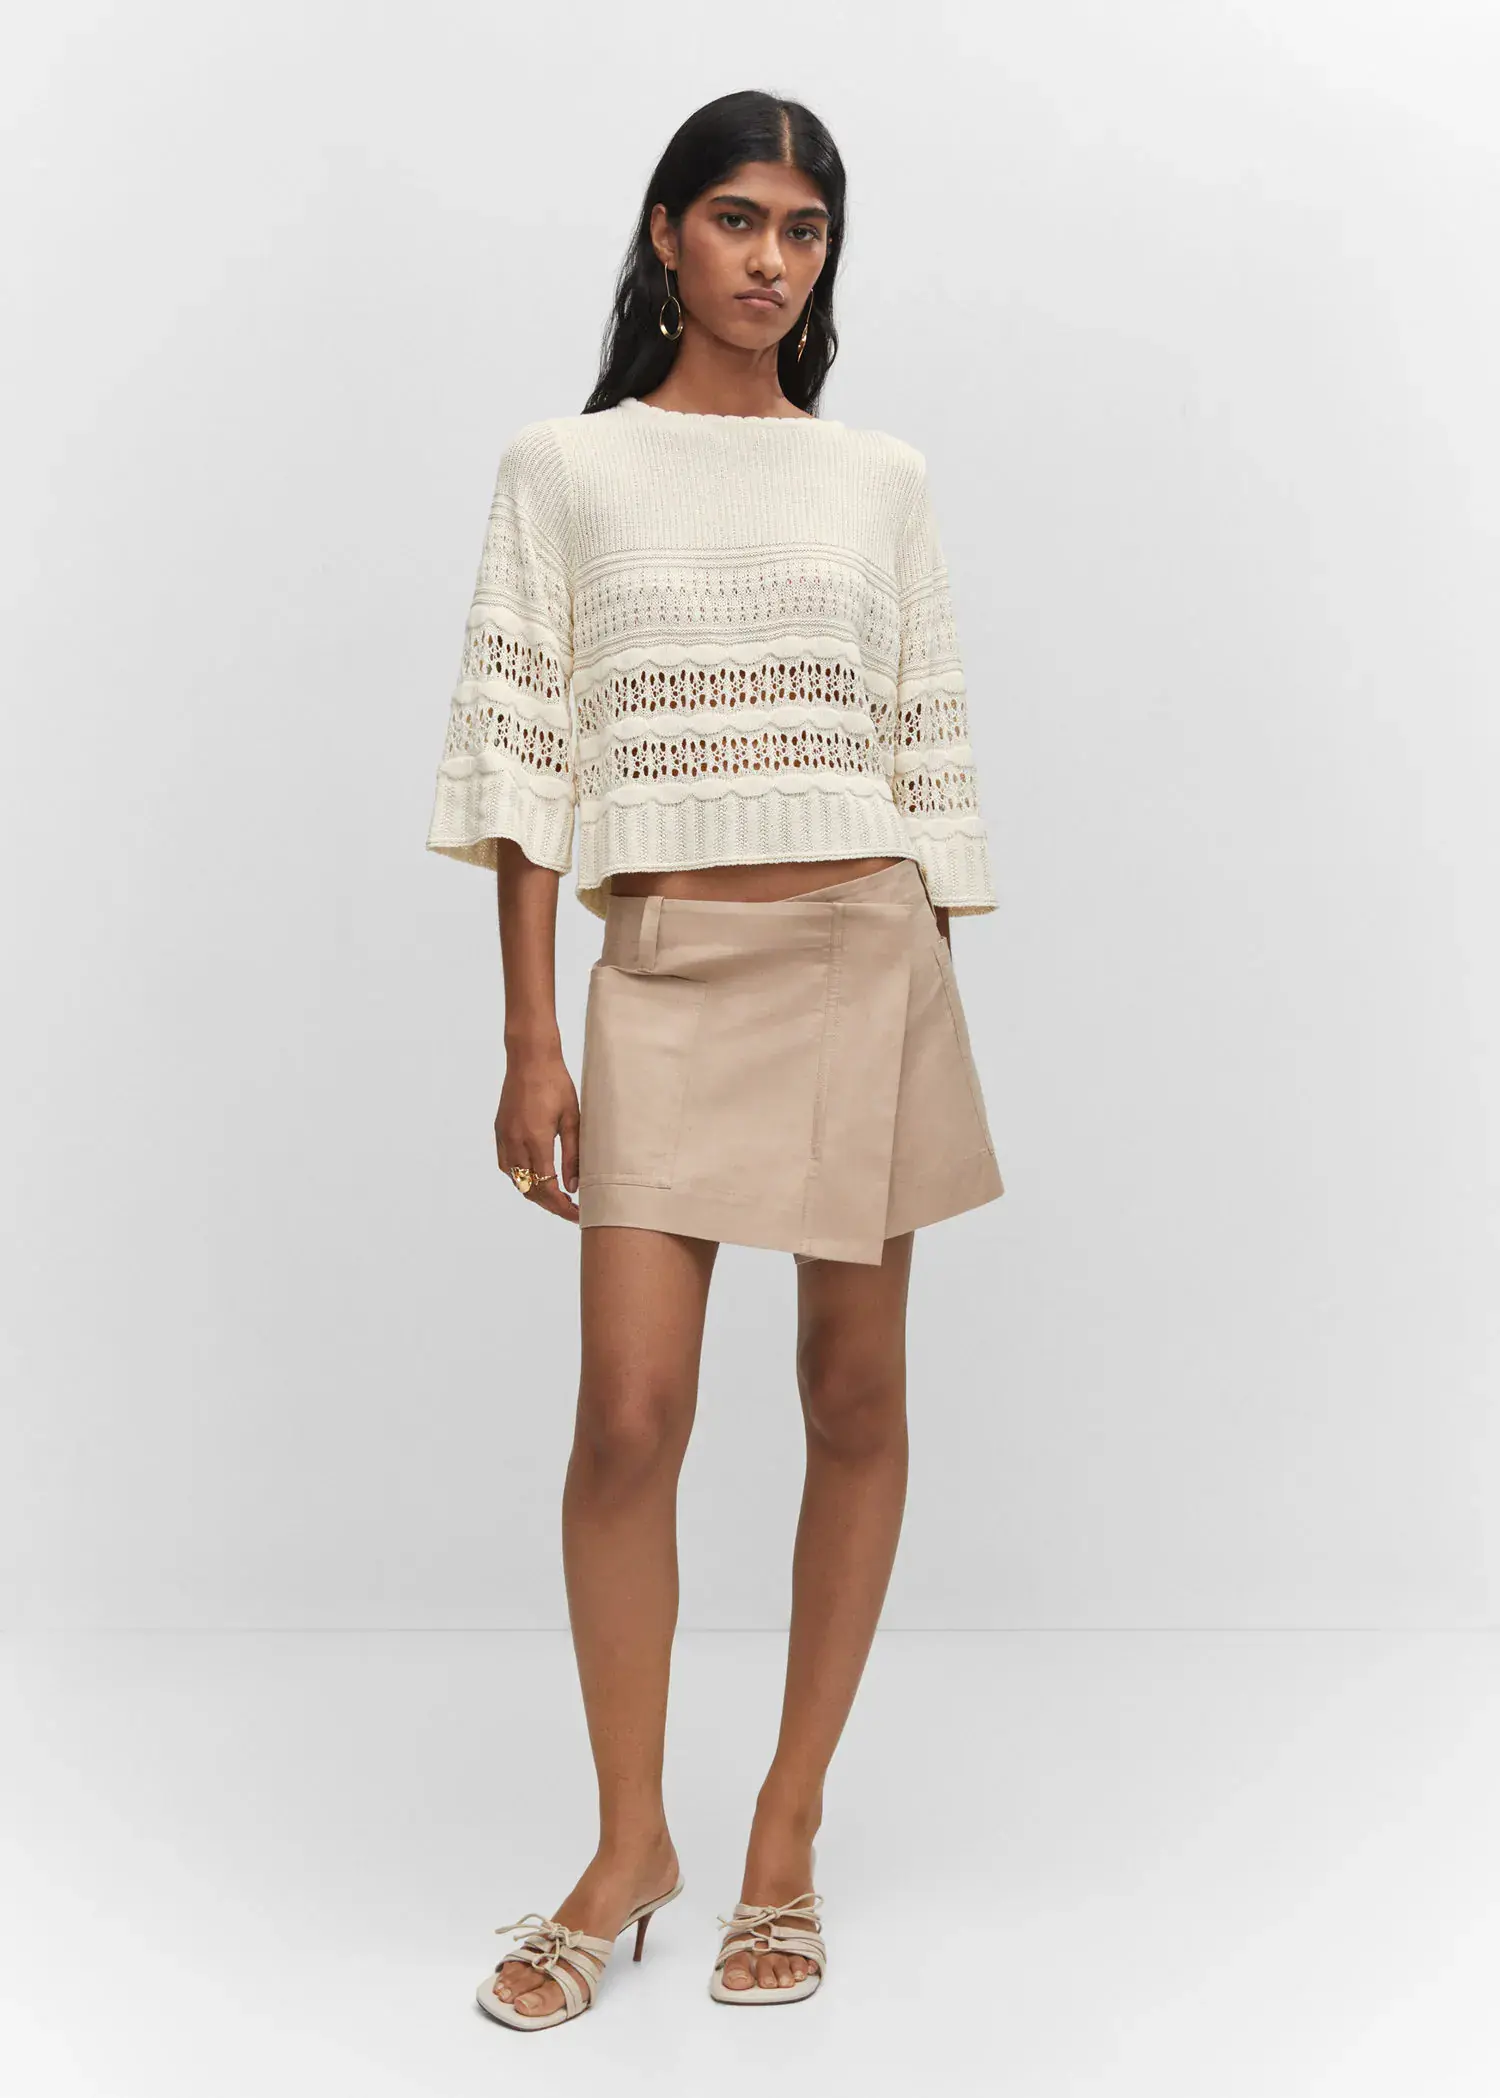 Mango Openwork sweater with flared sleeves. a woman in a white top and a skirt. 